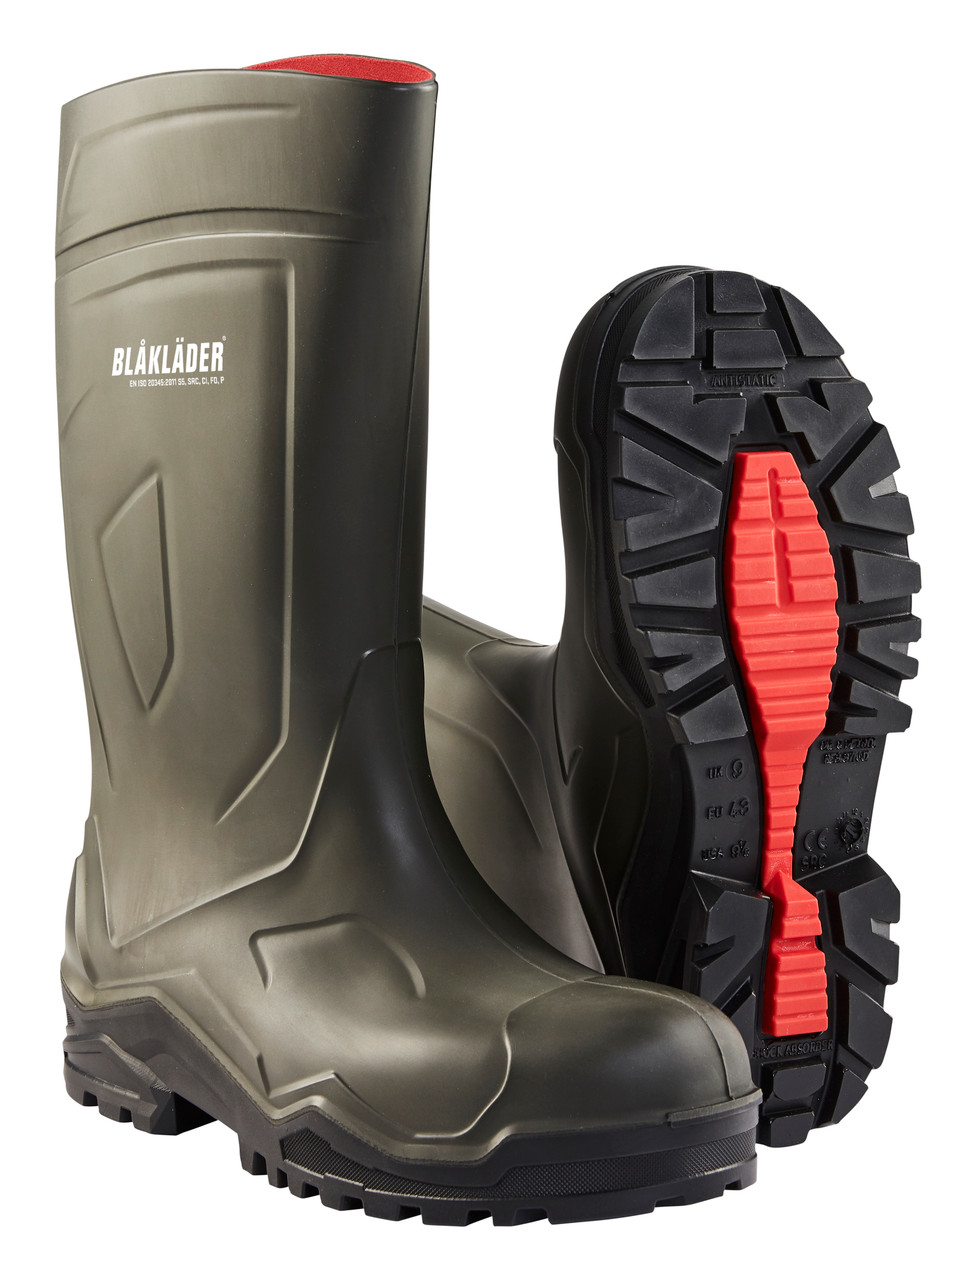 Buy online in Australia and New Zealand a BLAKLADER Gumboots Safety Boots for Plumber that perform exceptionally for Plumbing